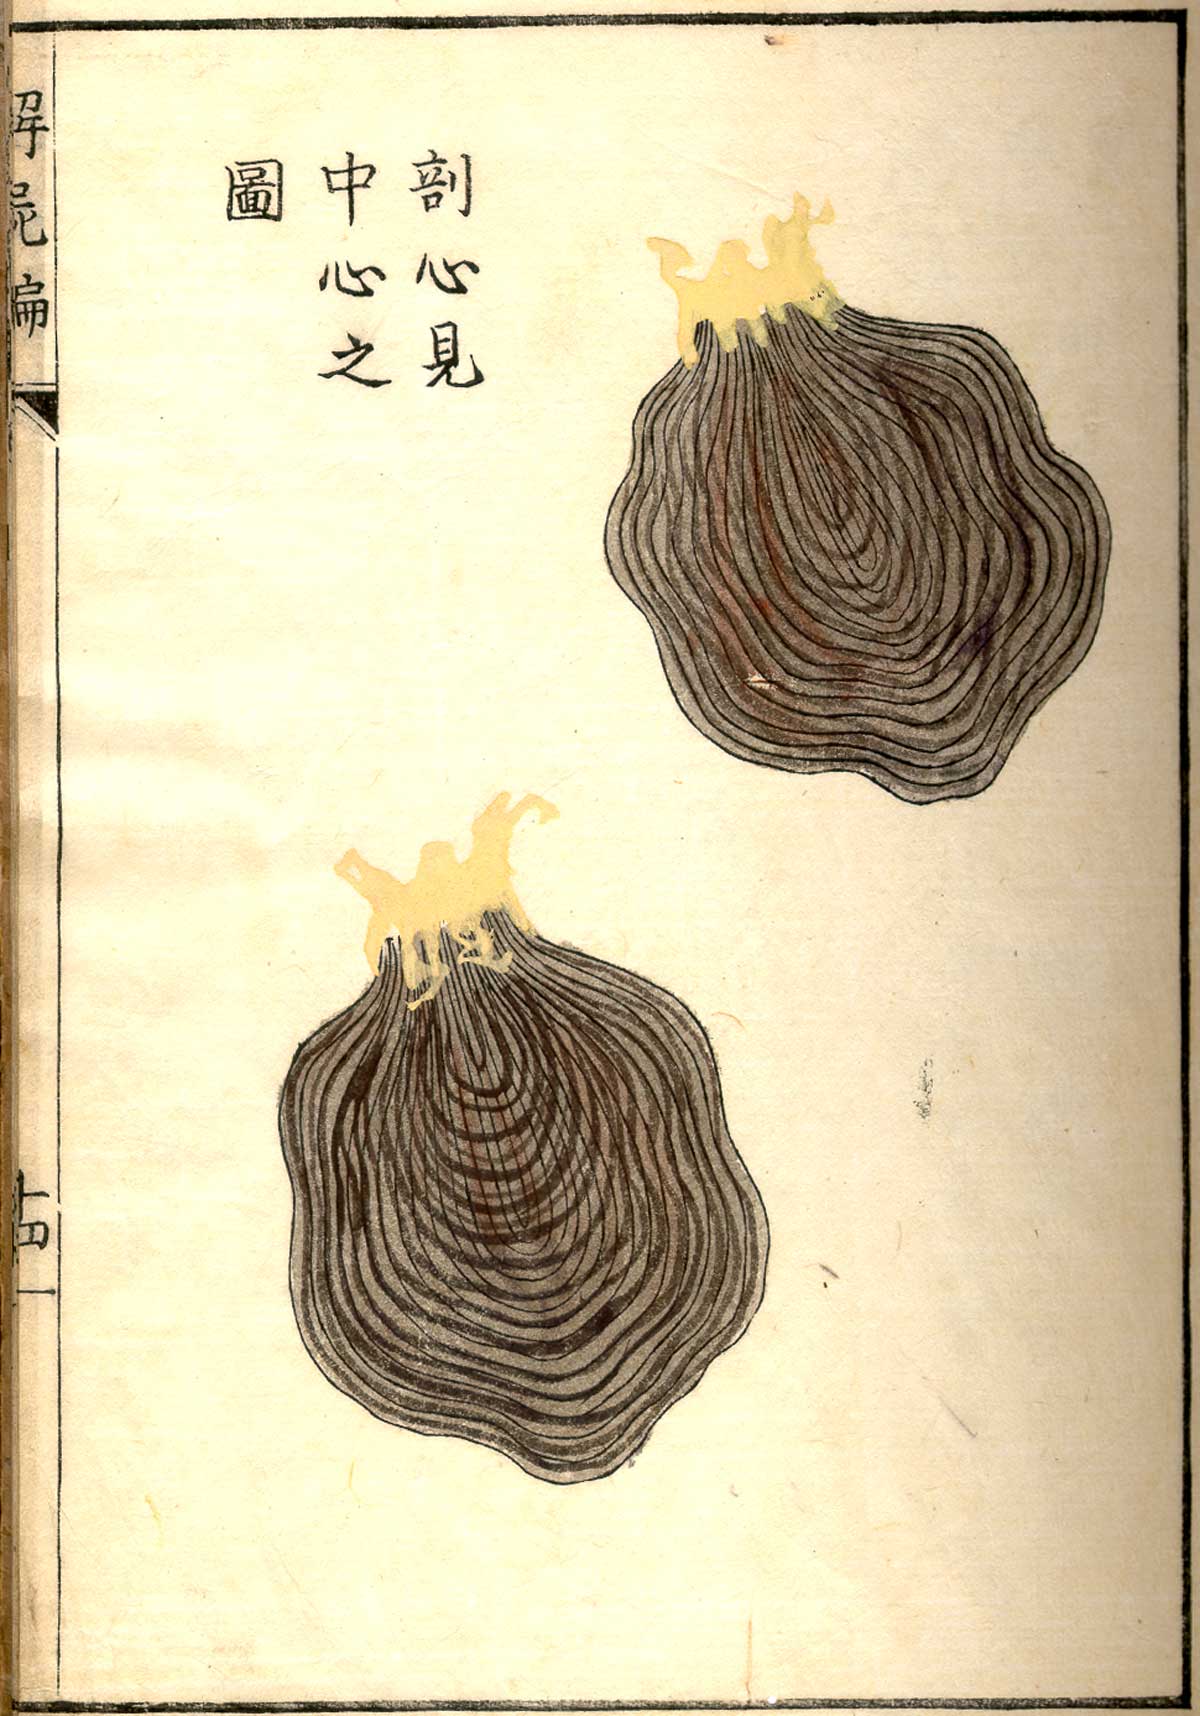 Hand colored woodcut of the heart in cross-section, with Japanese text above and below describing some of the structures, from Shinnin Kawaguchi's Kaishi hen, NLM Call no.: WZ 260 K21k 1772.